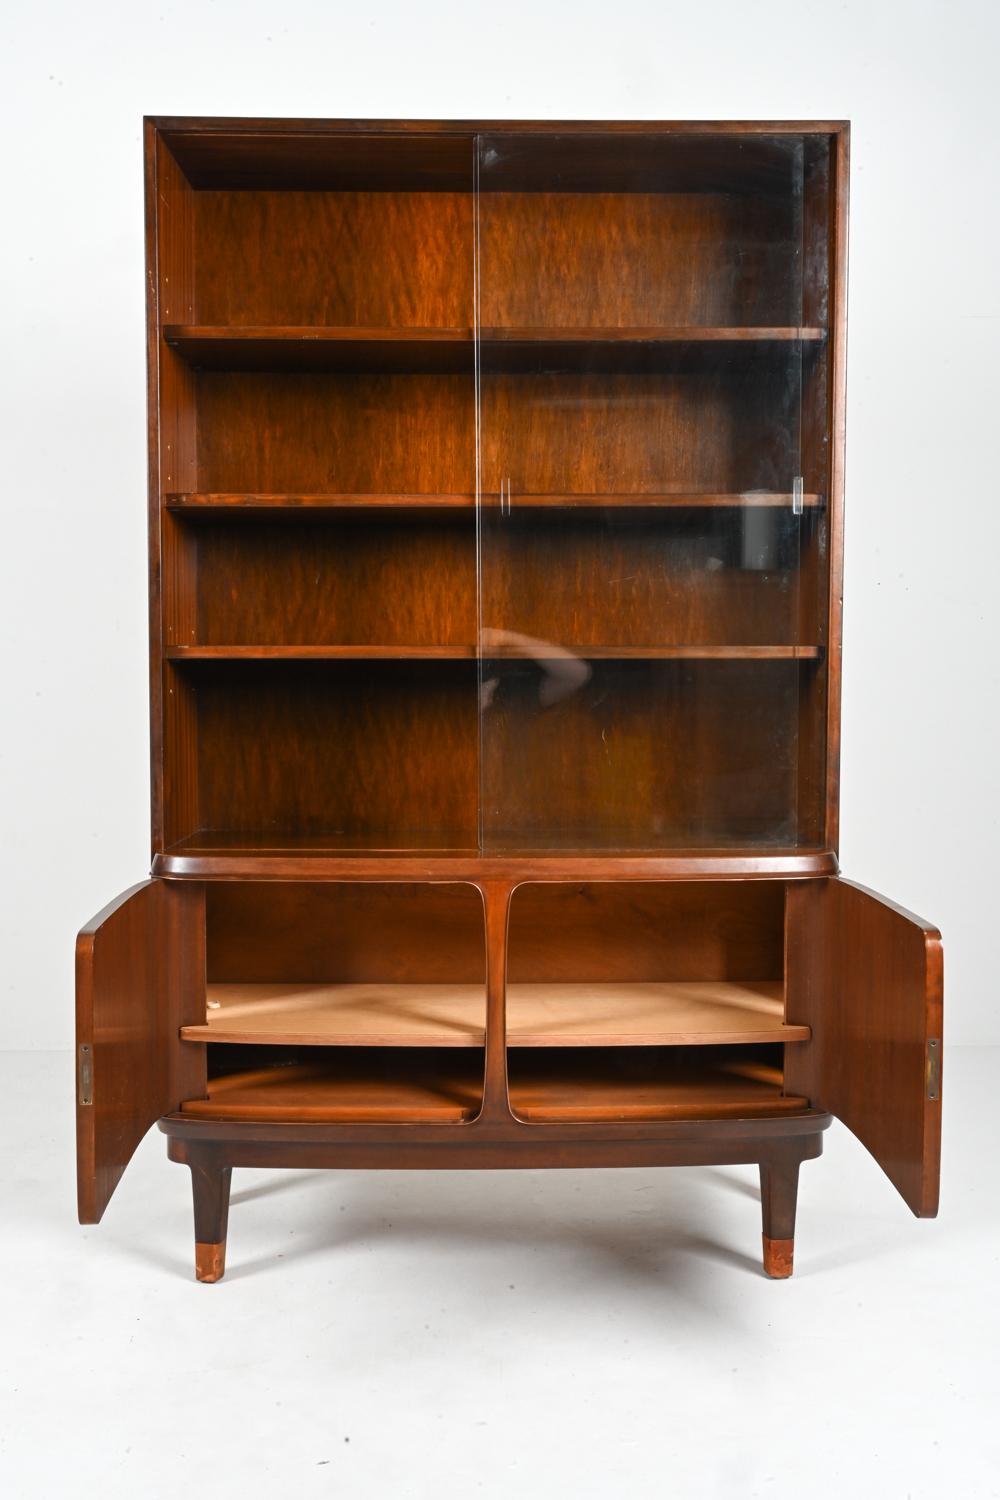 Danish Art Deco Glass-Front Bookcase or Display Cabinet by Georg Kofoed For Sale 2